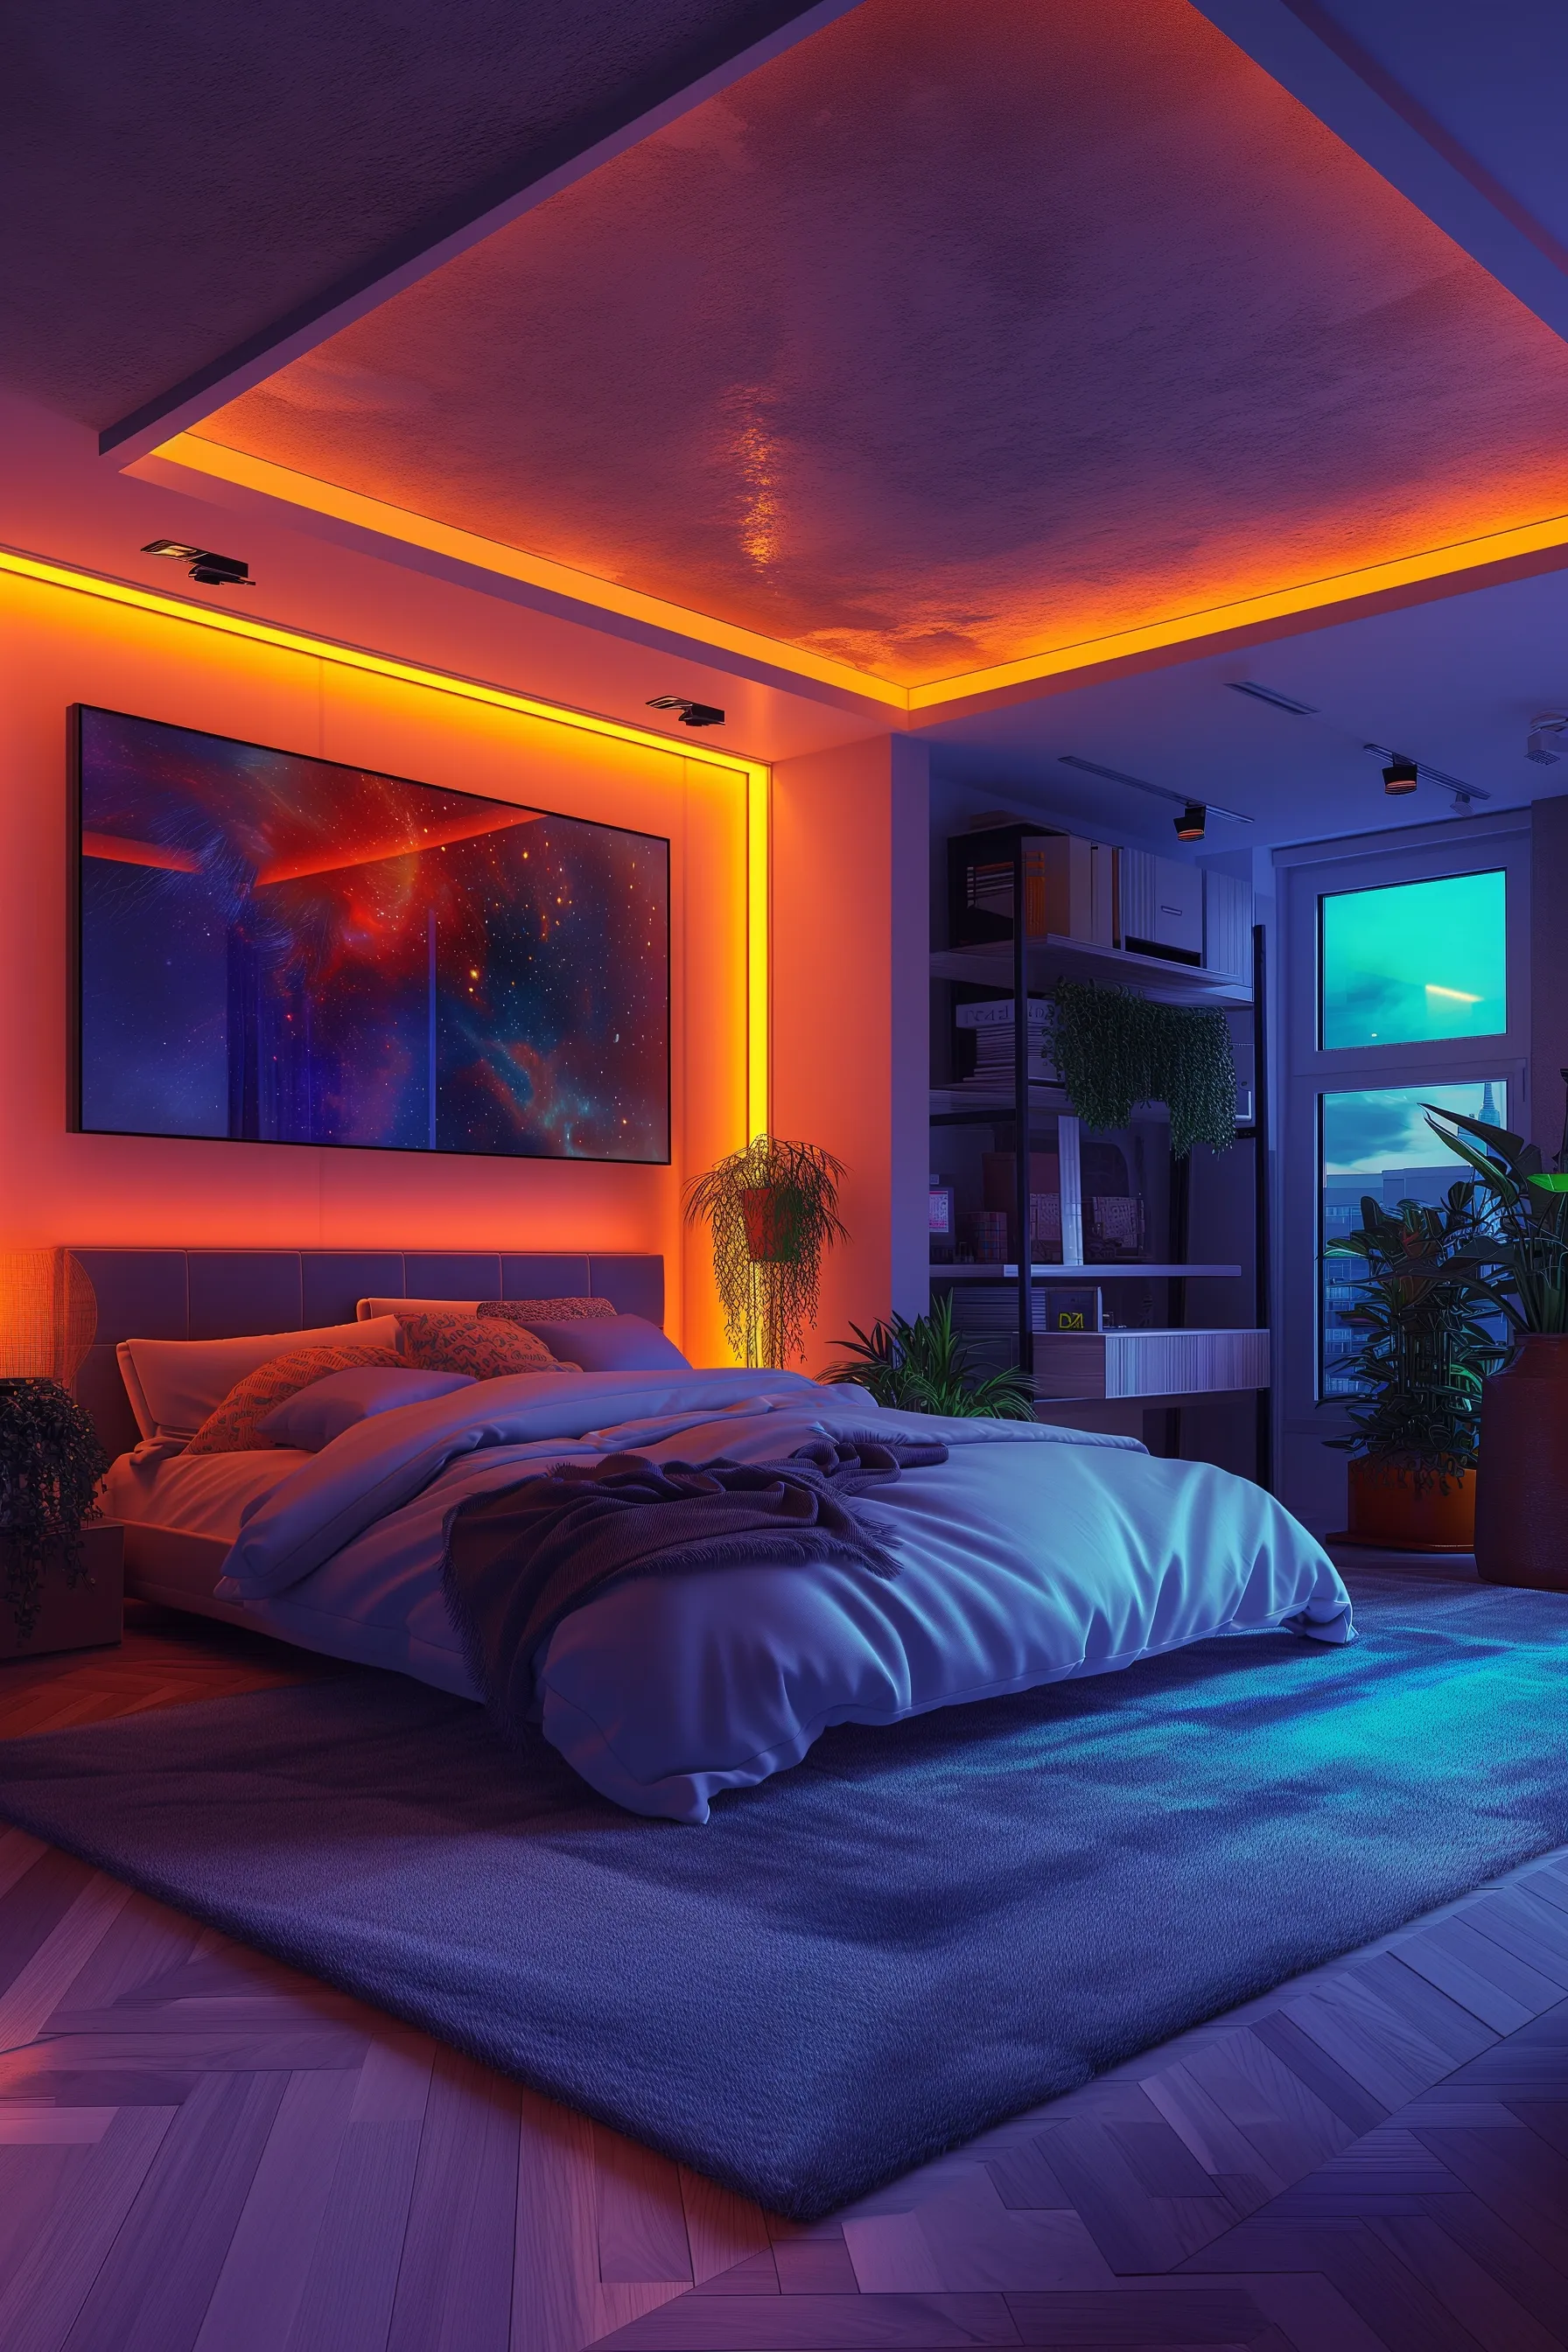 A futuristic bedroom with orange and yellow lights